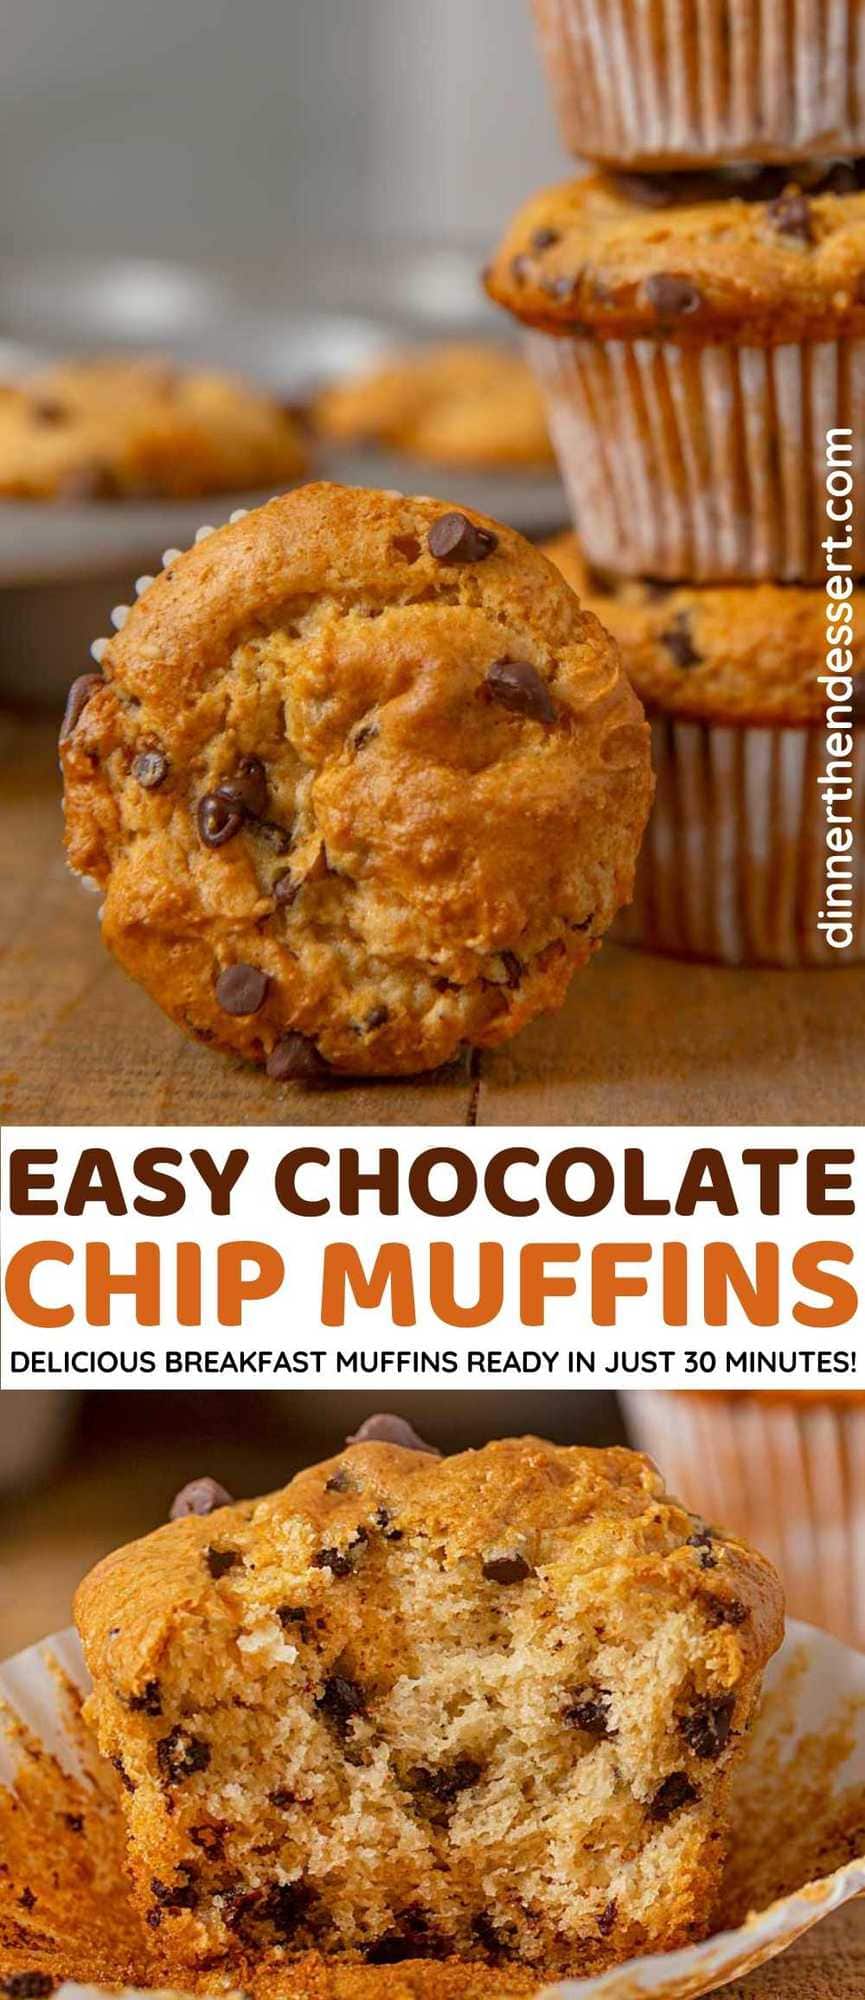 Chocolate Chip Muffins collage